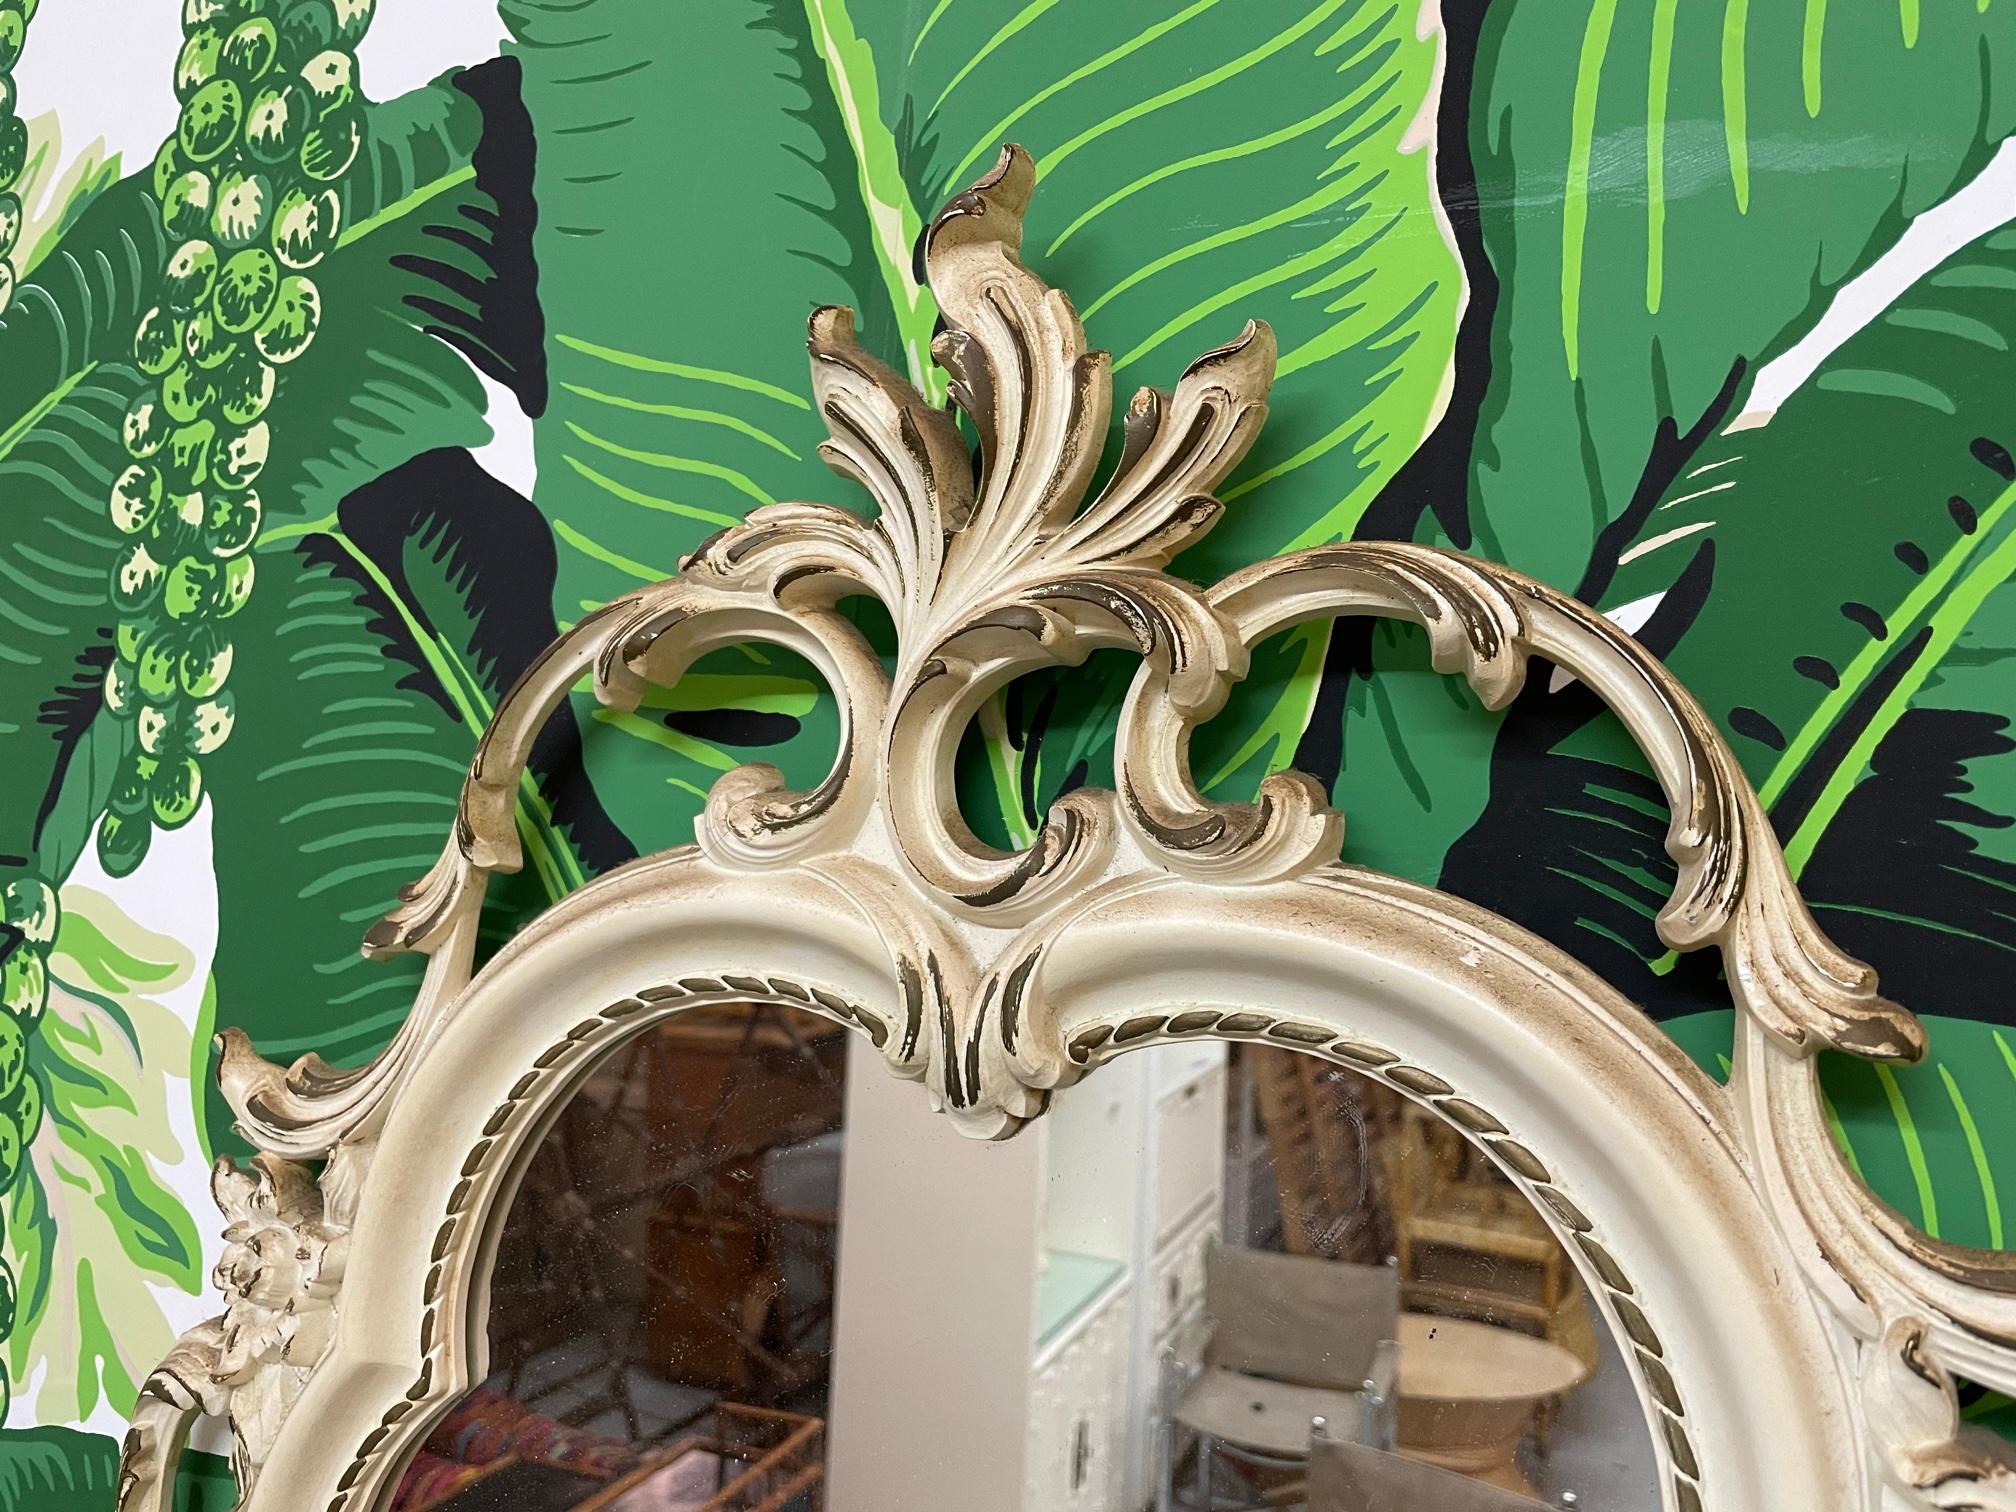 Ornate hand carved mirror by Syroco features intricate acanthus leaf scrollwork surrounding frame. Very good vintage condition with minor imperfections consistent with age.